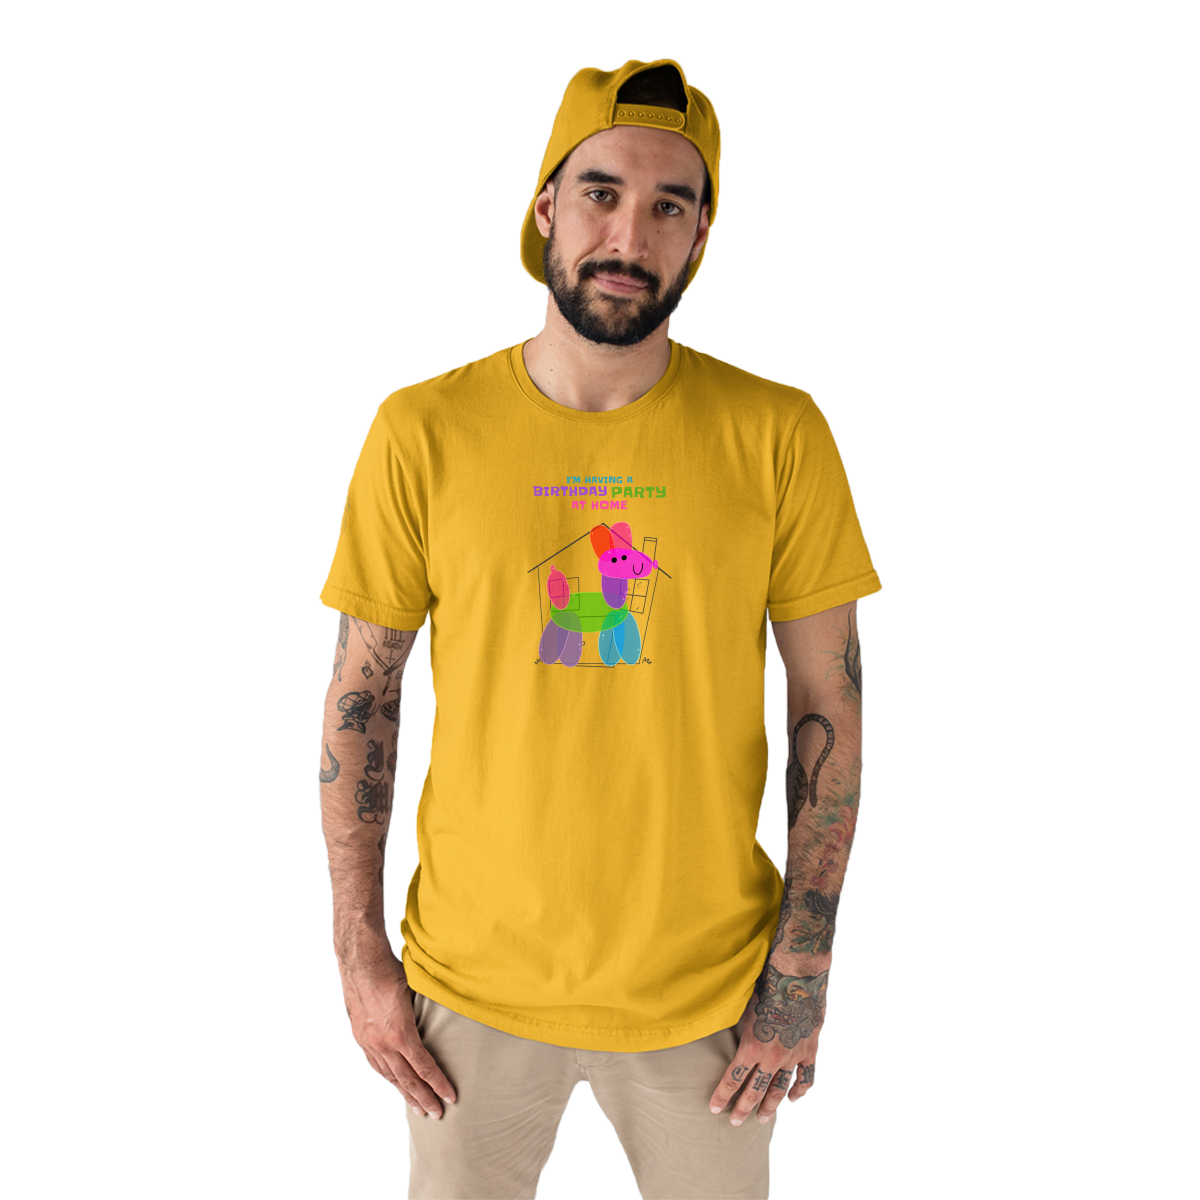 I'm having a birthday party at home  Men's T-shirt | Yellow